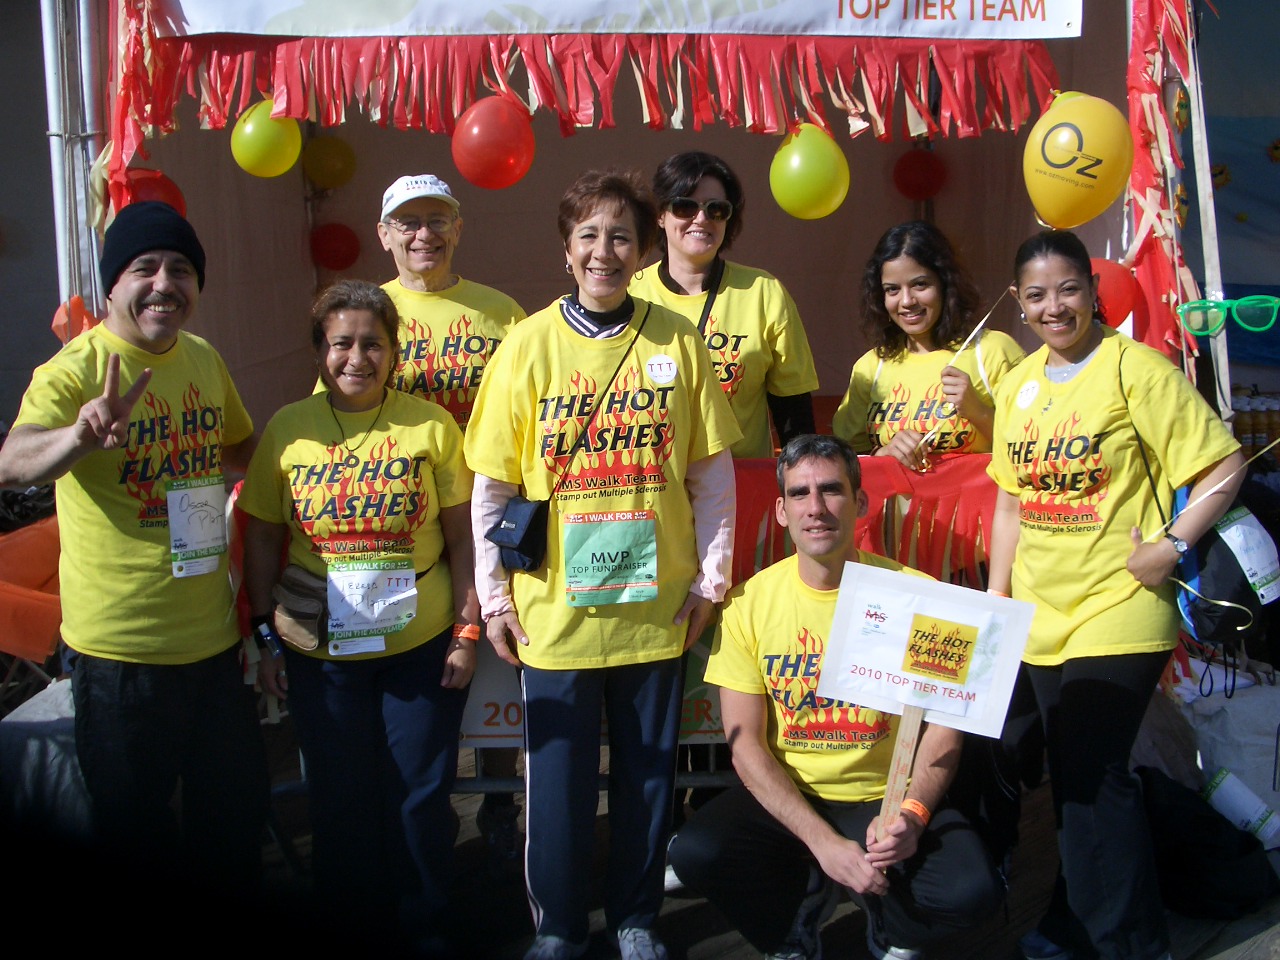 Picture of the Hot Flashes team at South Street Seaport in 2010, by the tent